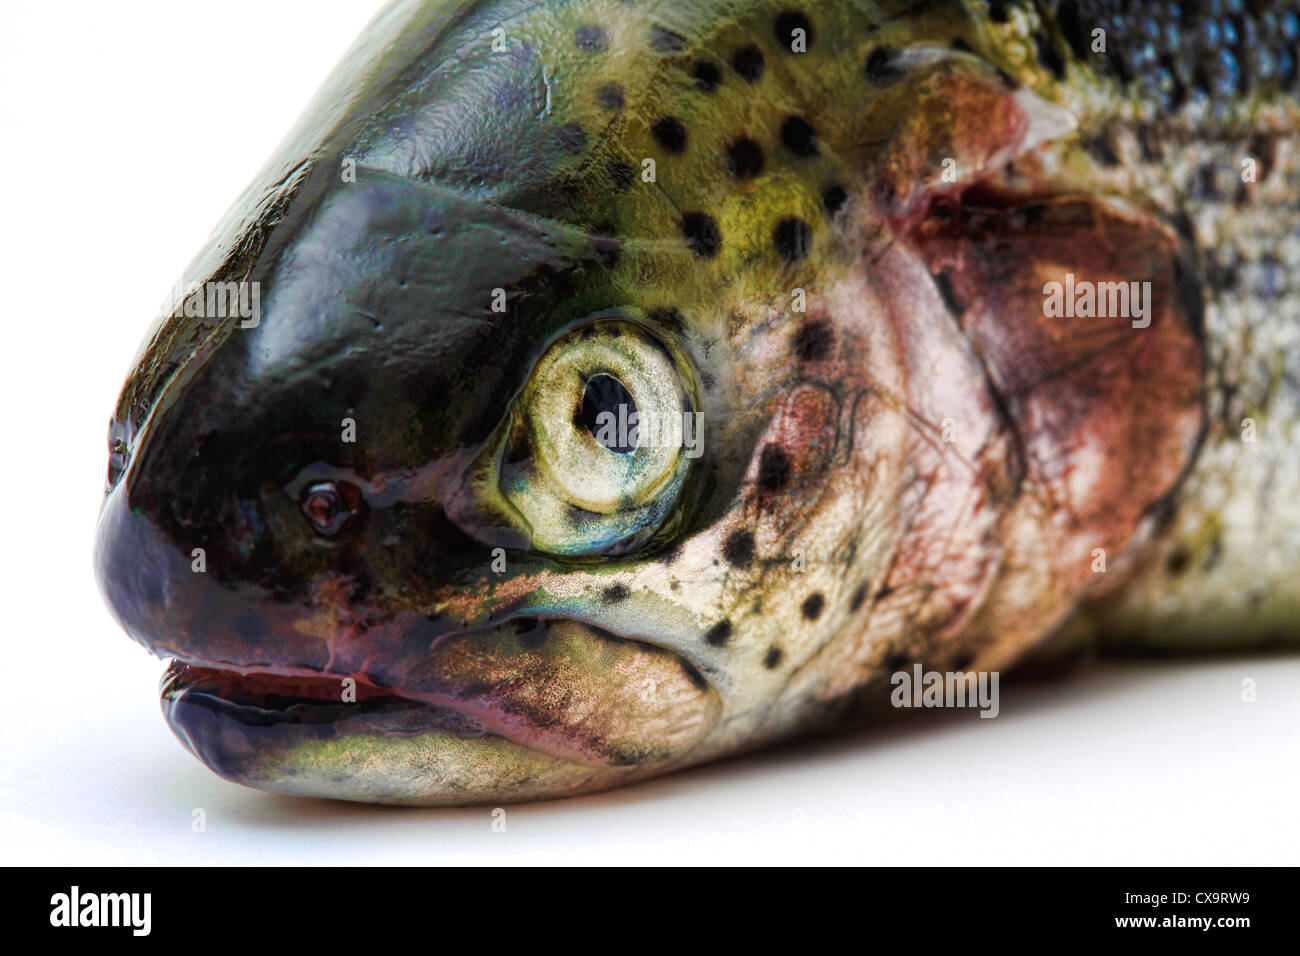 Sea fish on a white background, face details Stock Photo